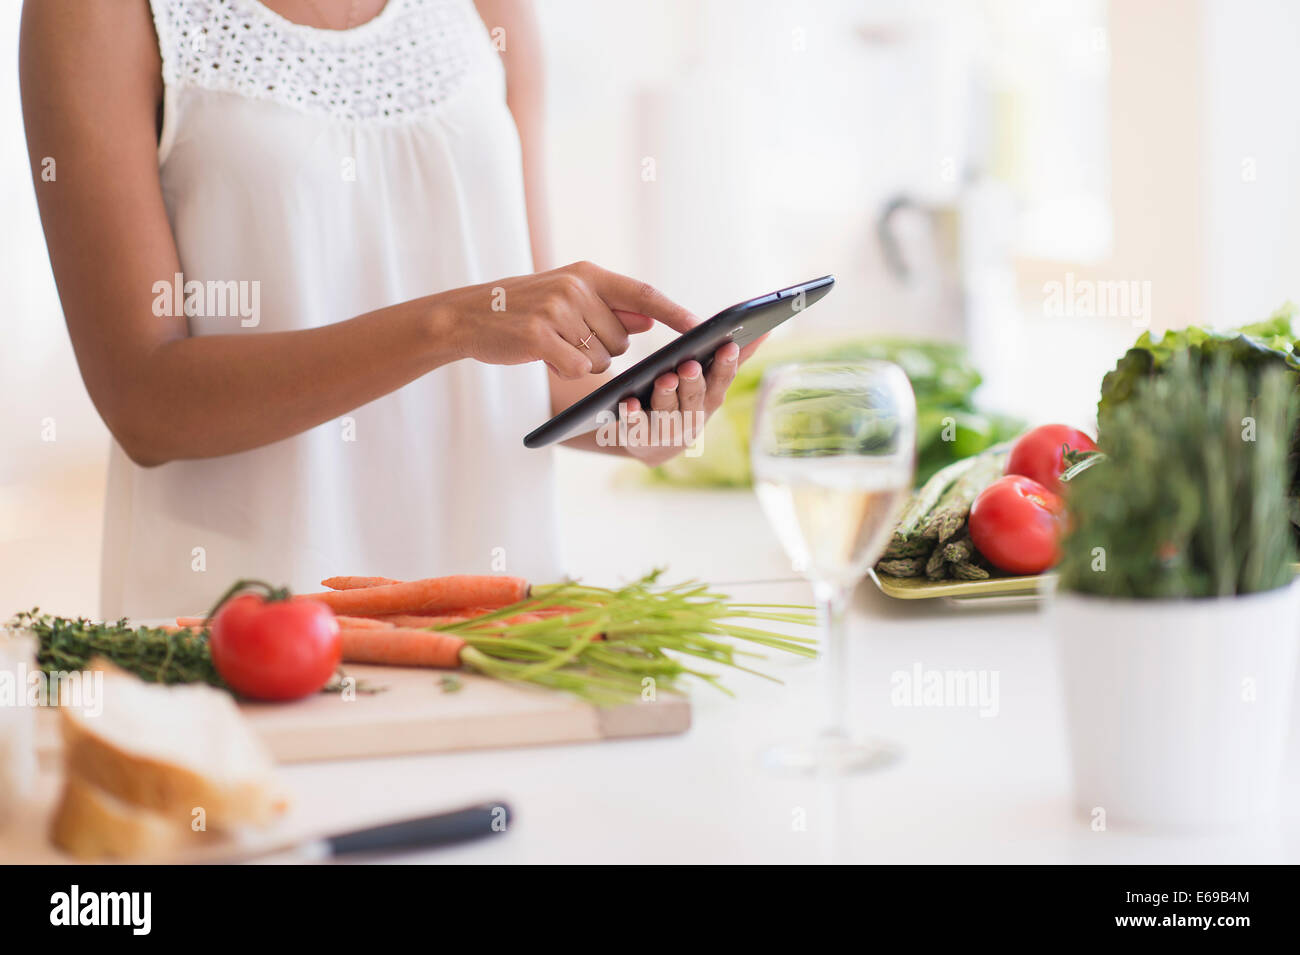 Hispanic woman cooking with digital tablet in kitchen Stock Photo